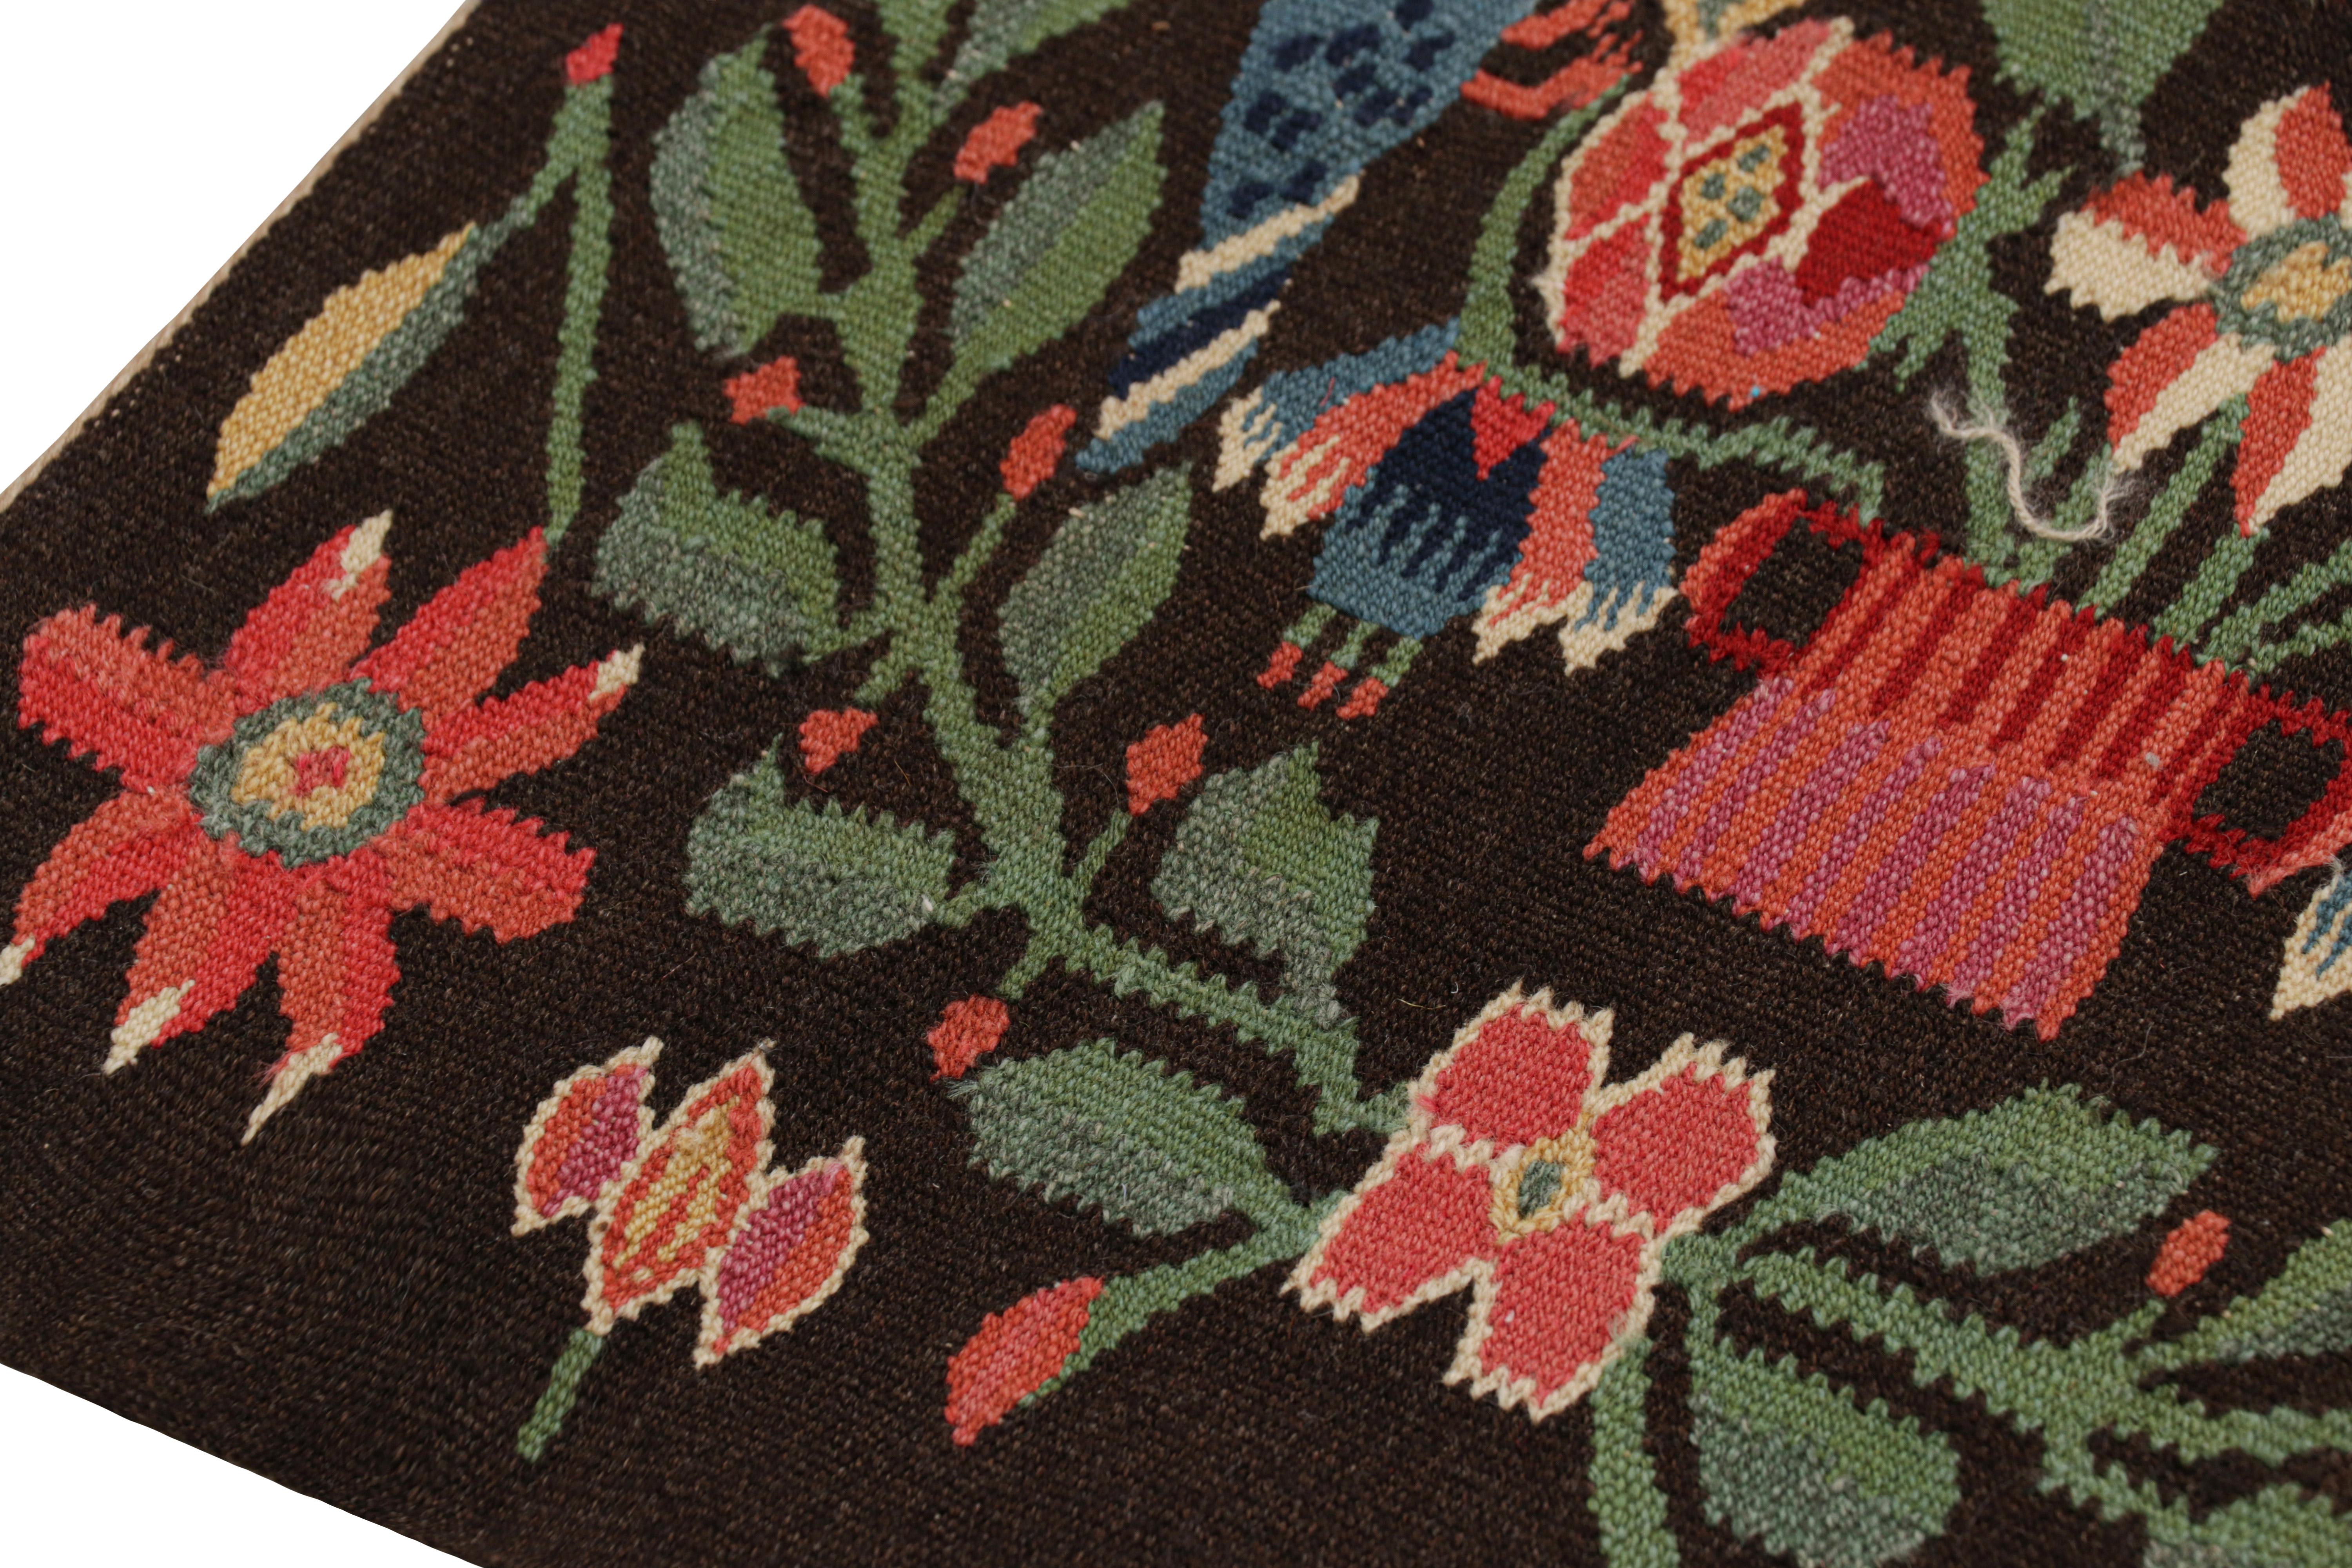 Wool Antique Swedish Rollakan Tapestry with Pictorials and Florals, from Rug & Kilim For Sale